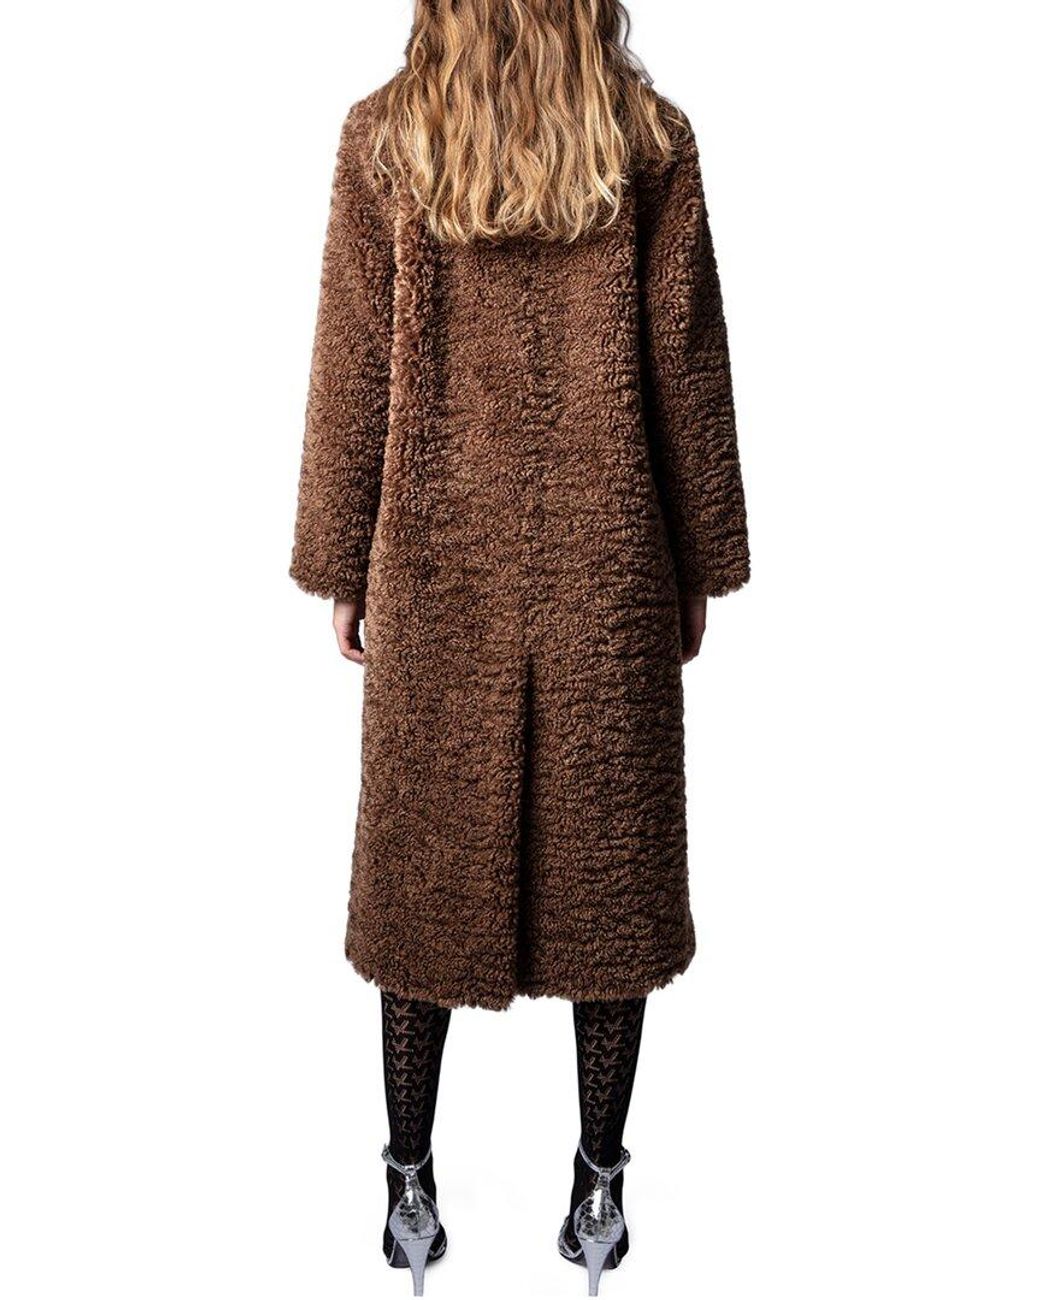 Zadig & Voltaire Milan Soft Curly Manteau Coat in Brown | Lyst